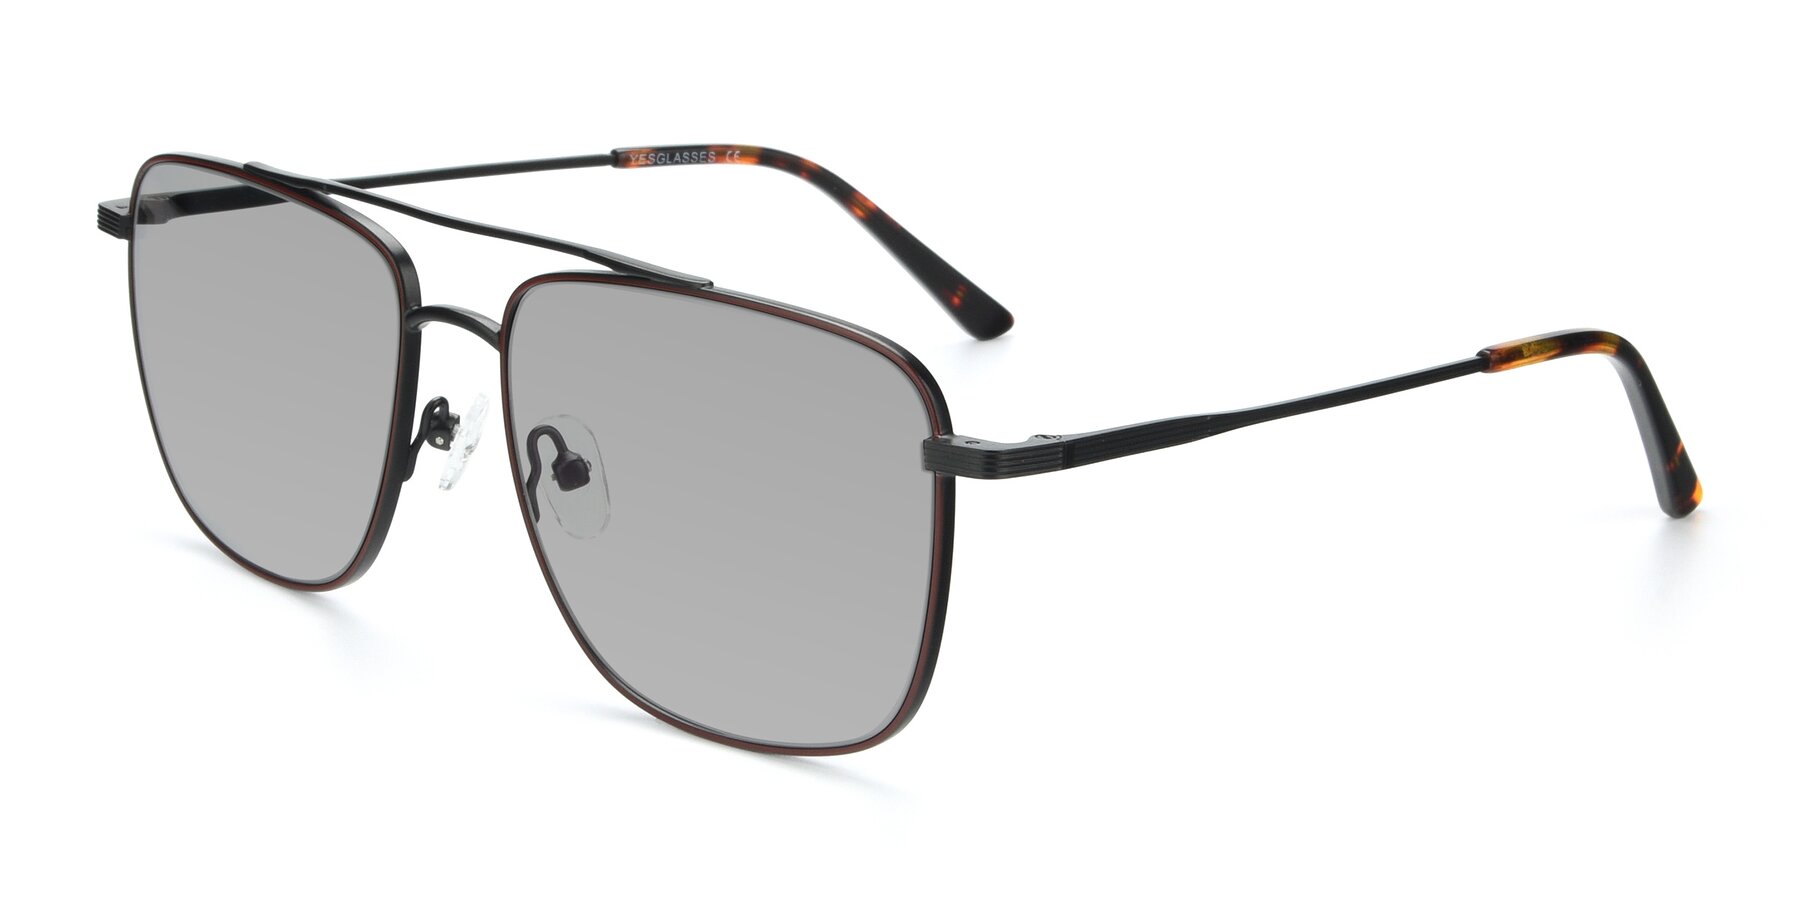 Angle of 9519 in Brown-Black with Light Gray Tinted Lenses